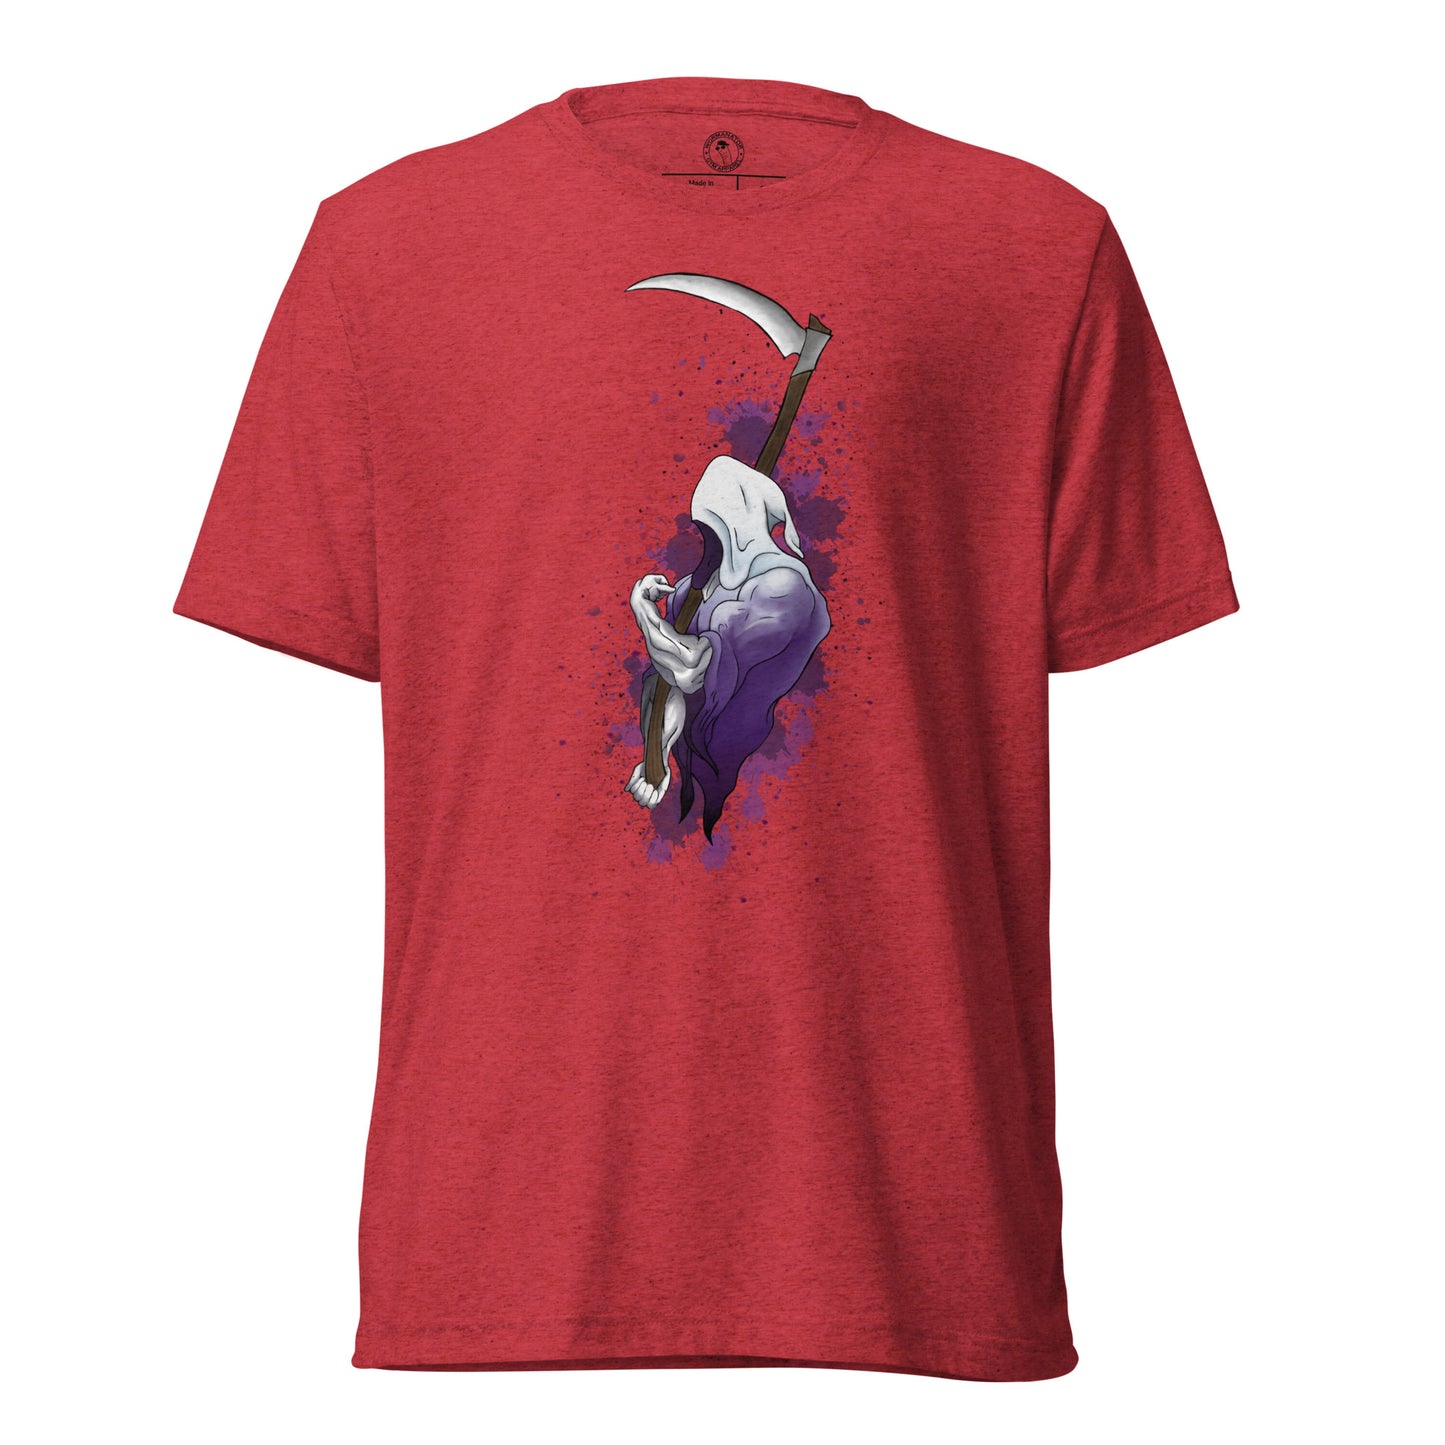 Grip Reaper Shirt in Red Triblend